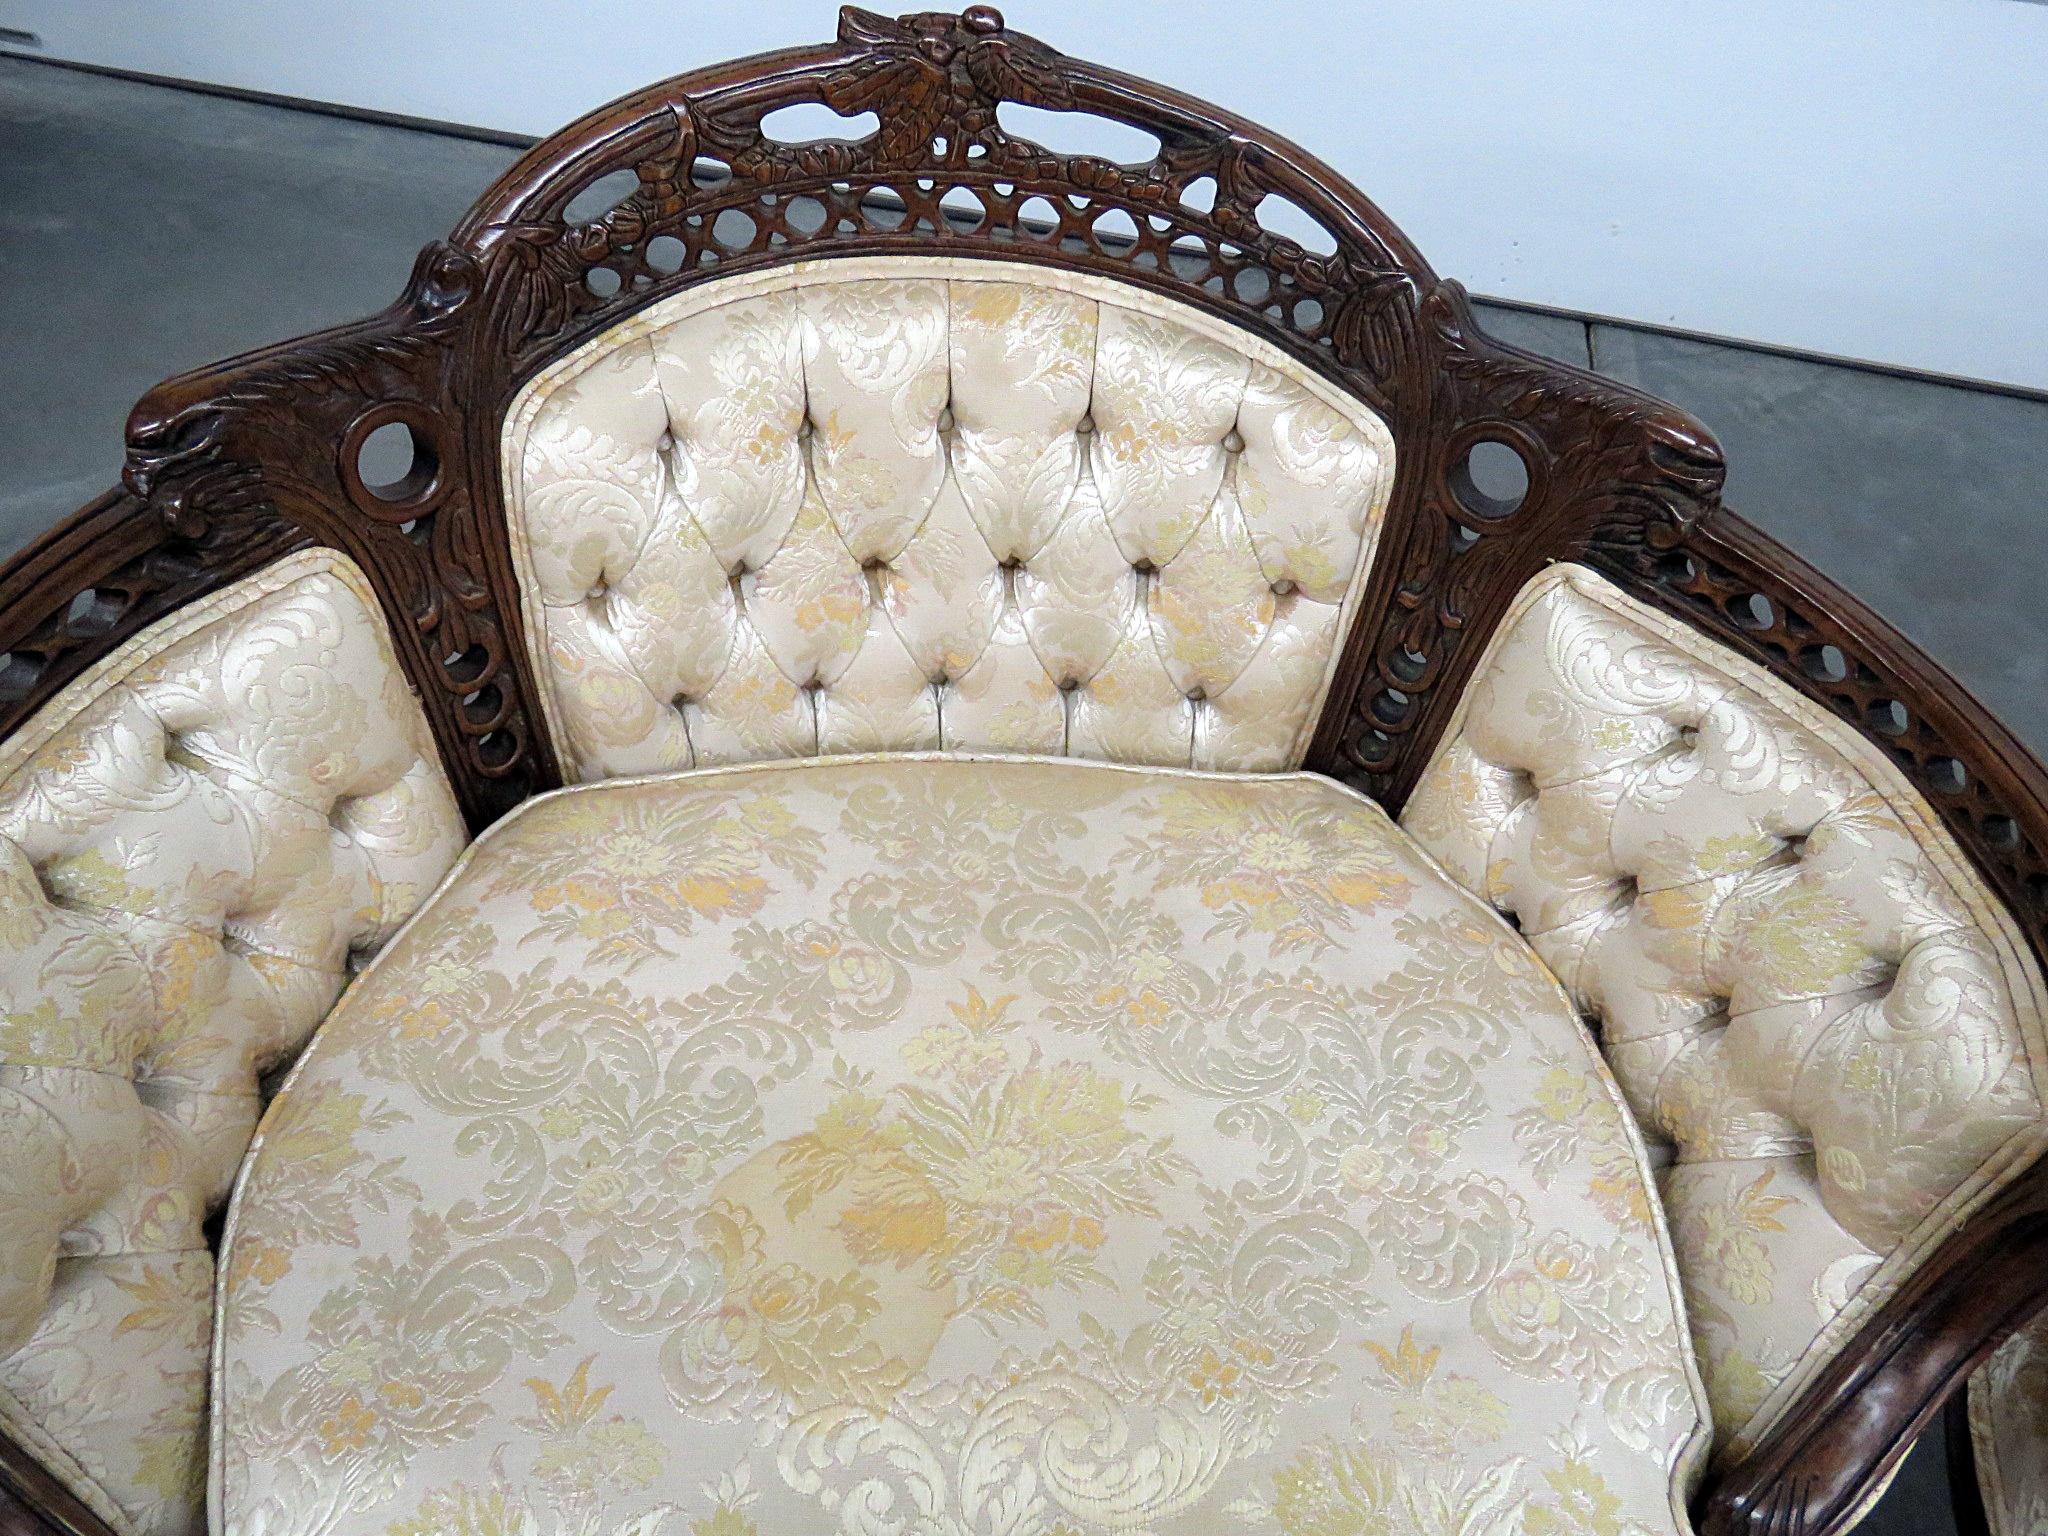 20th Century Pair of French Carved Mahogany Tufted Louis XV Style Marquis Bergere Chairs